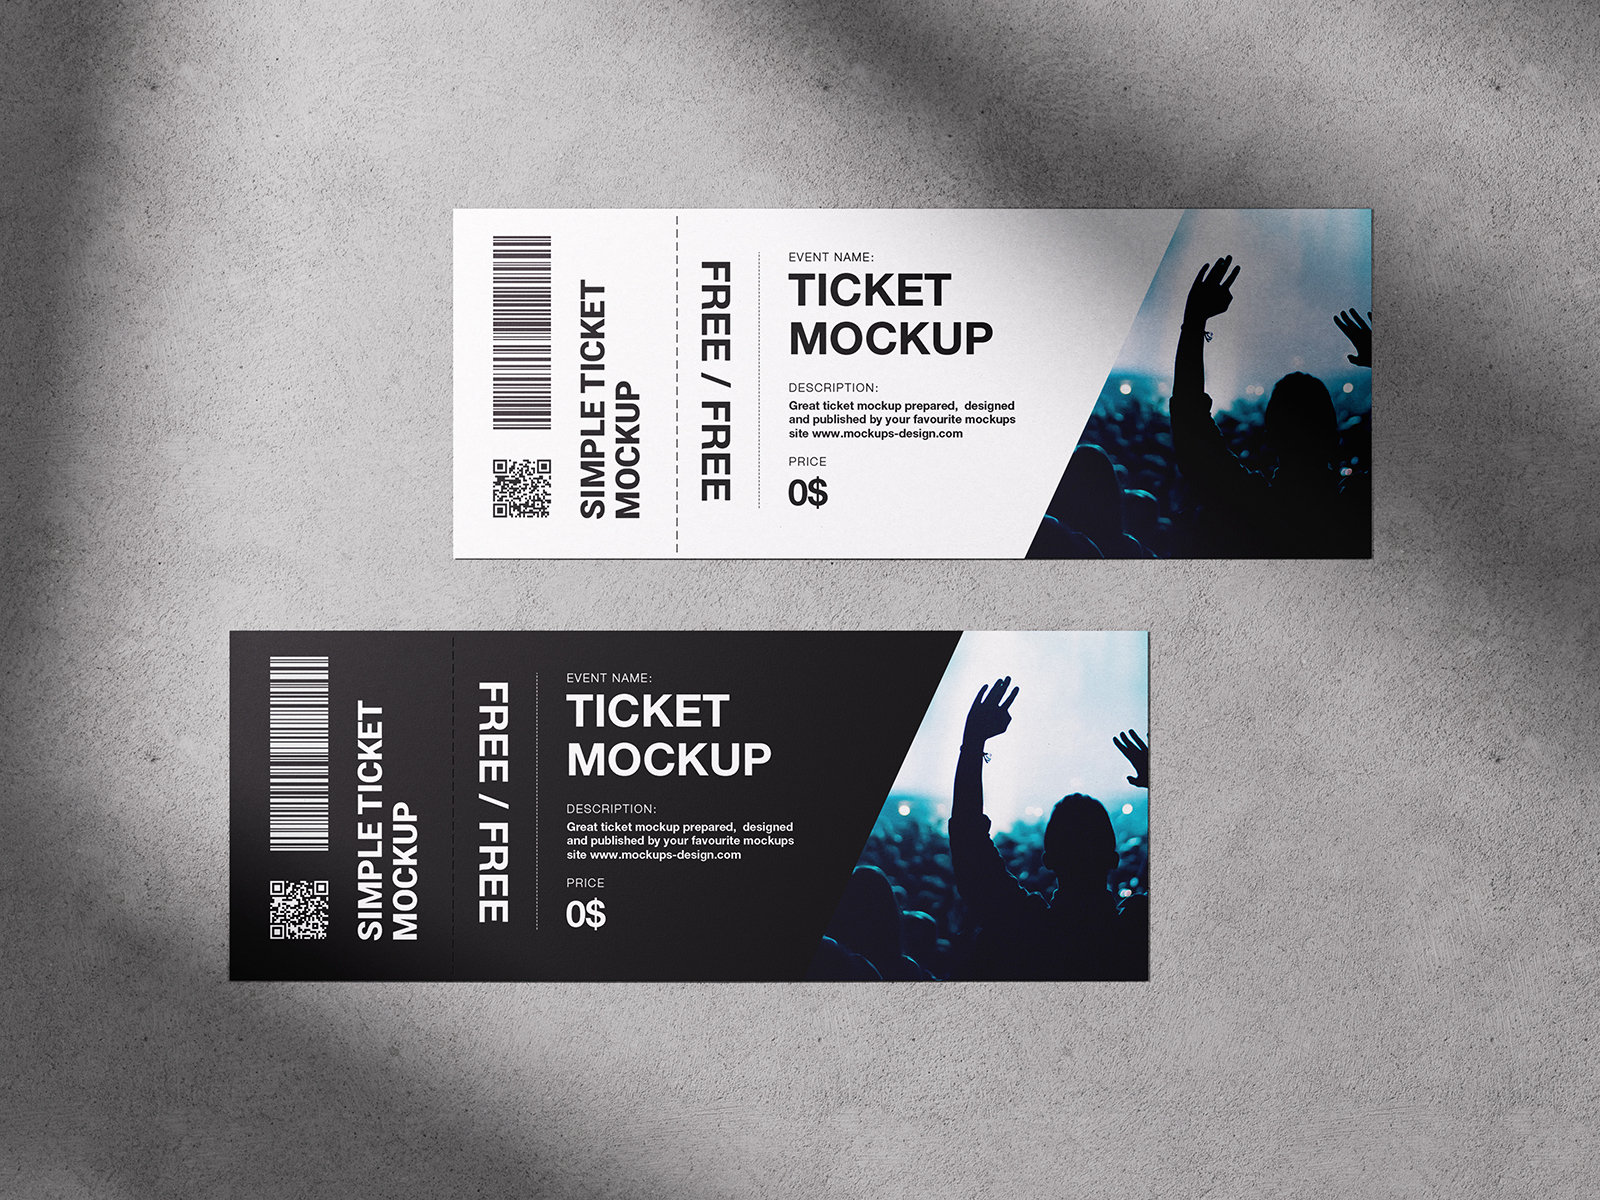 3 Shots of Tickets Mockup on Concrete Background FREE PSD